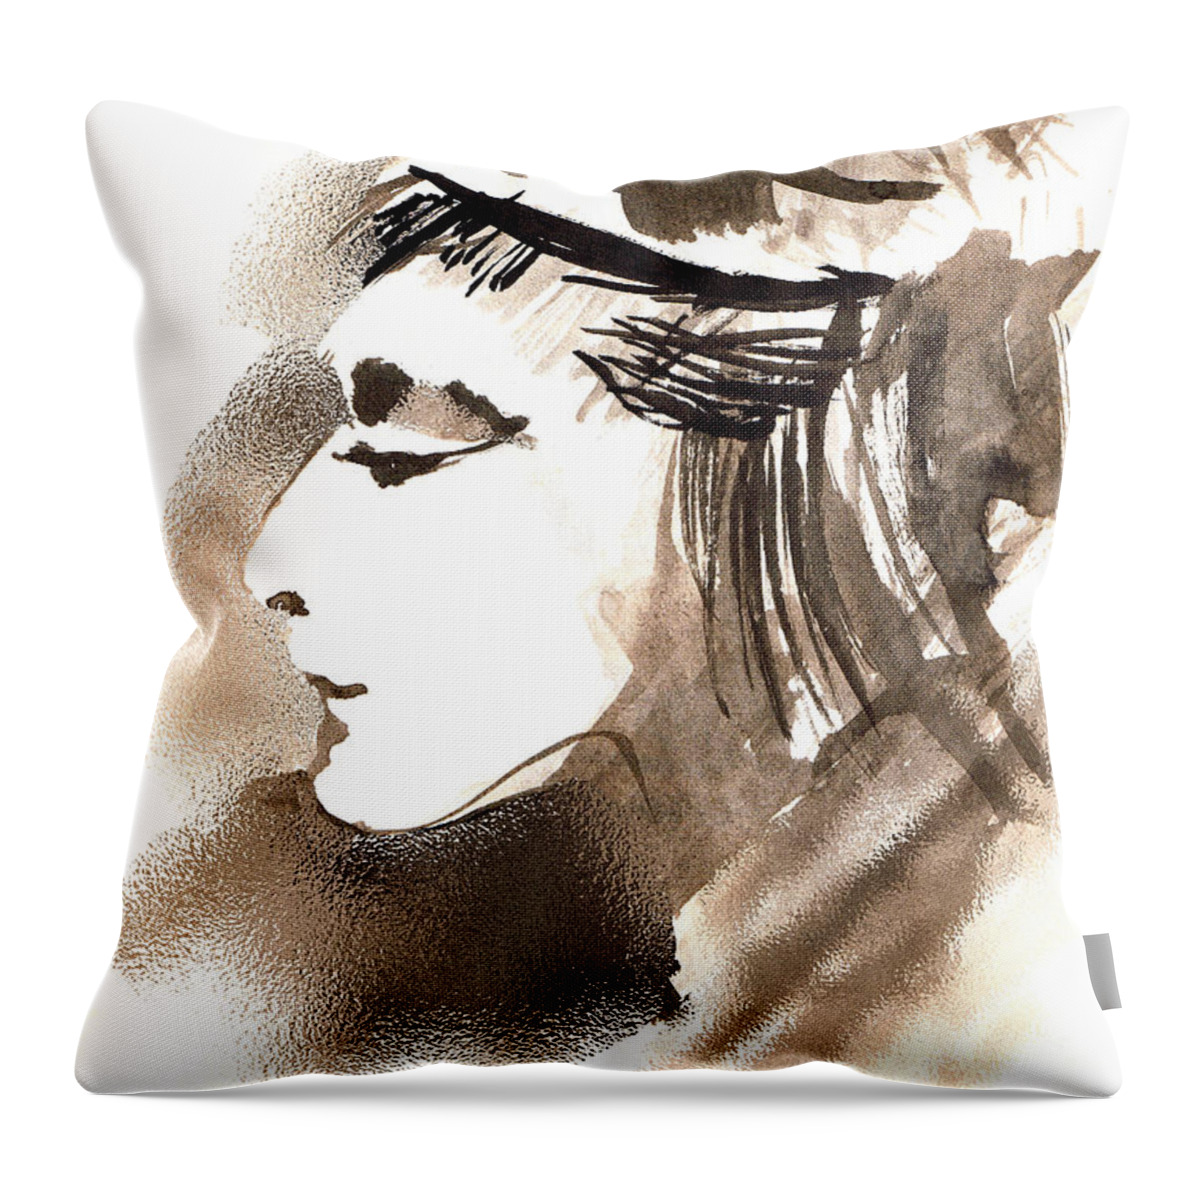 Poise Throw Pillow featuring the digital art Poise by Seth Weaver